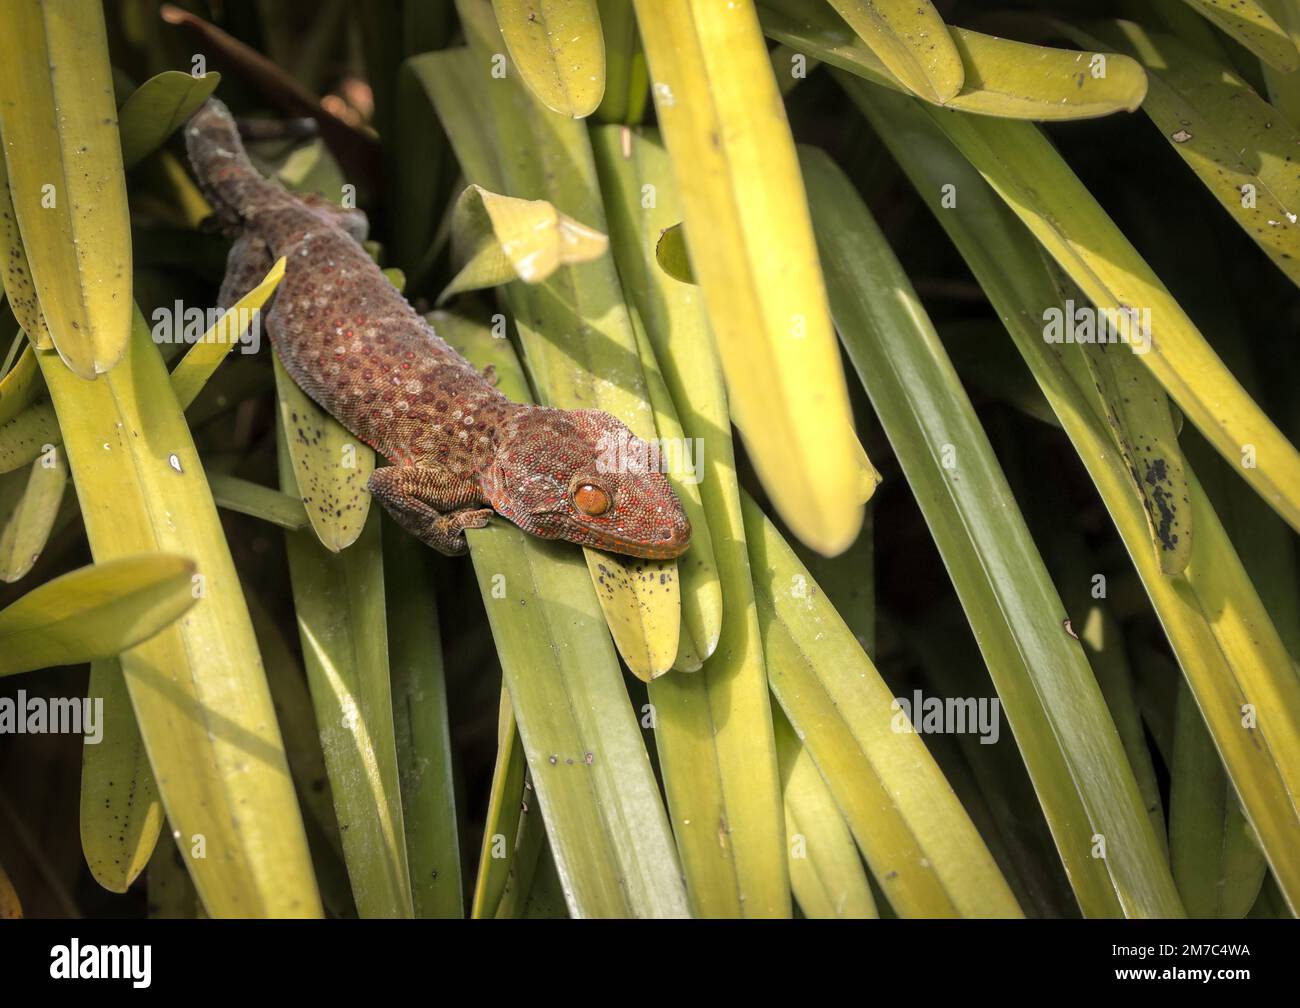 tokay gecko is a nocturnal arboreal gecko in the genus Gekko, the true geckos. It is native to Asia and some Pacific Islands. Stock Photo